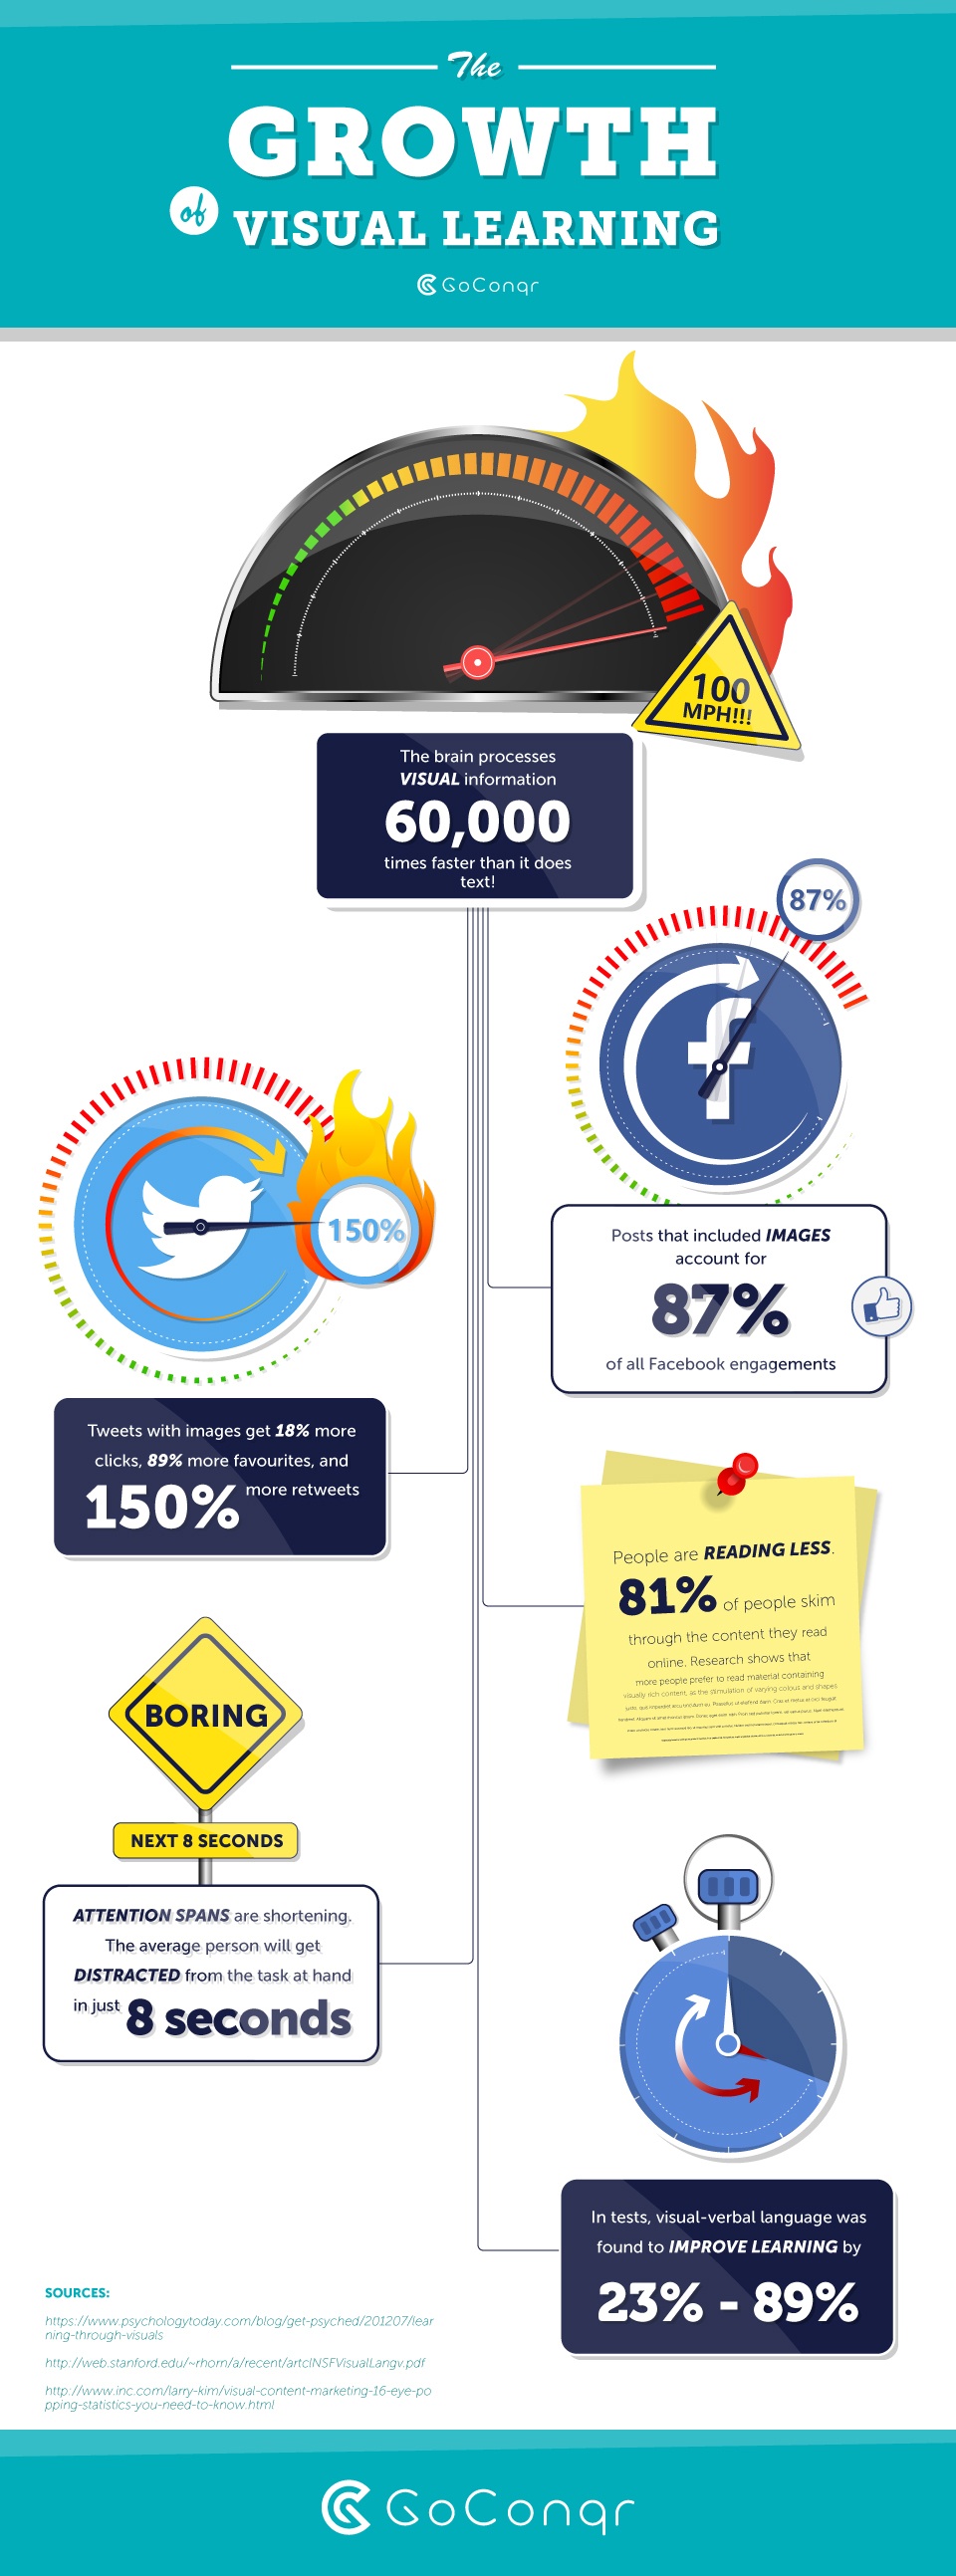 The Growth of Visual Learning Infographic